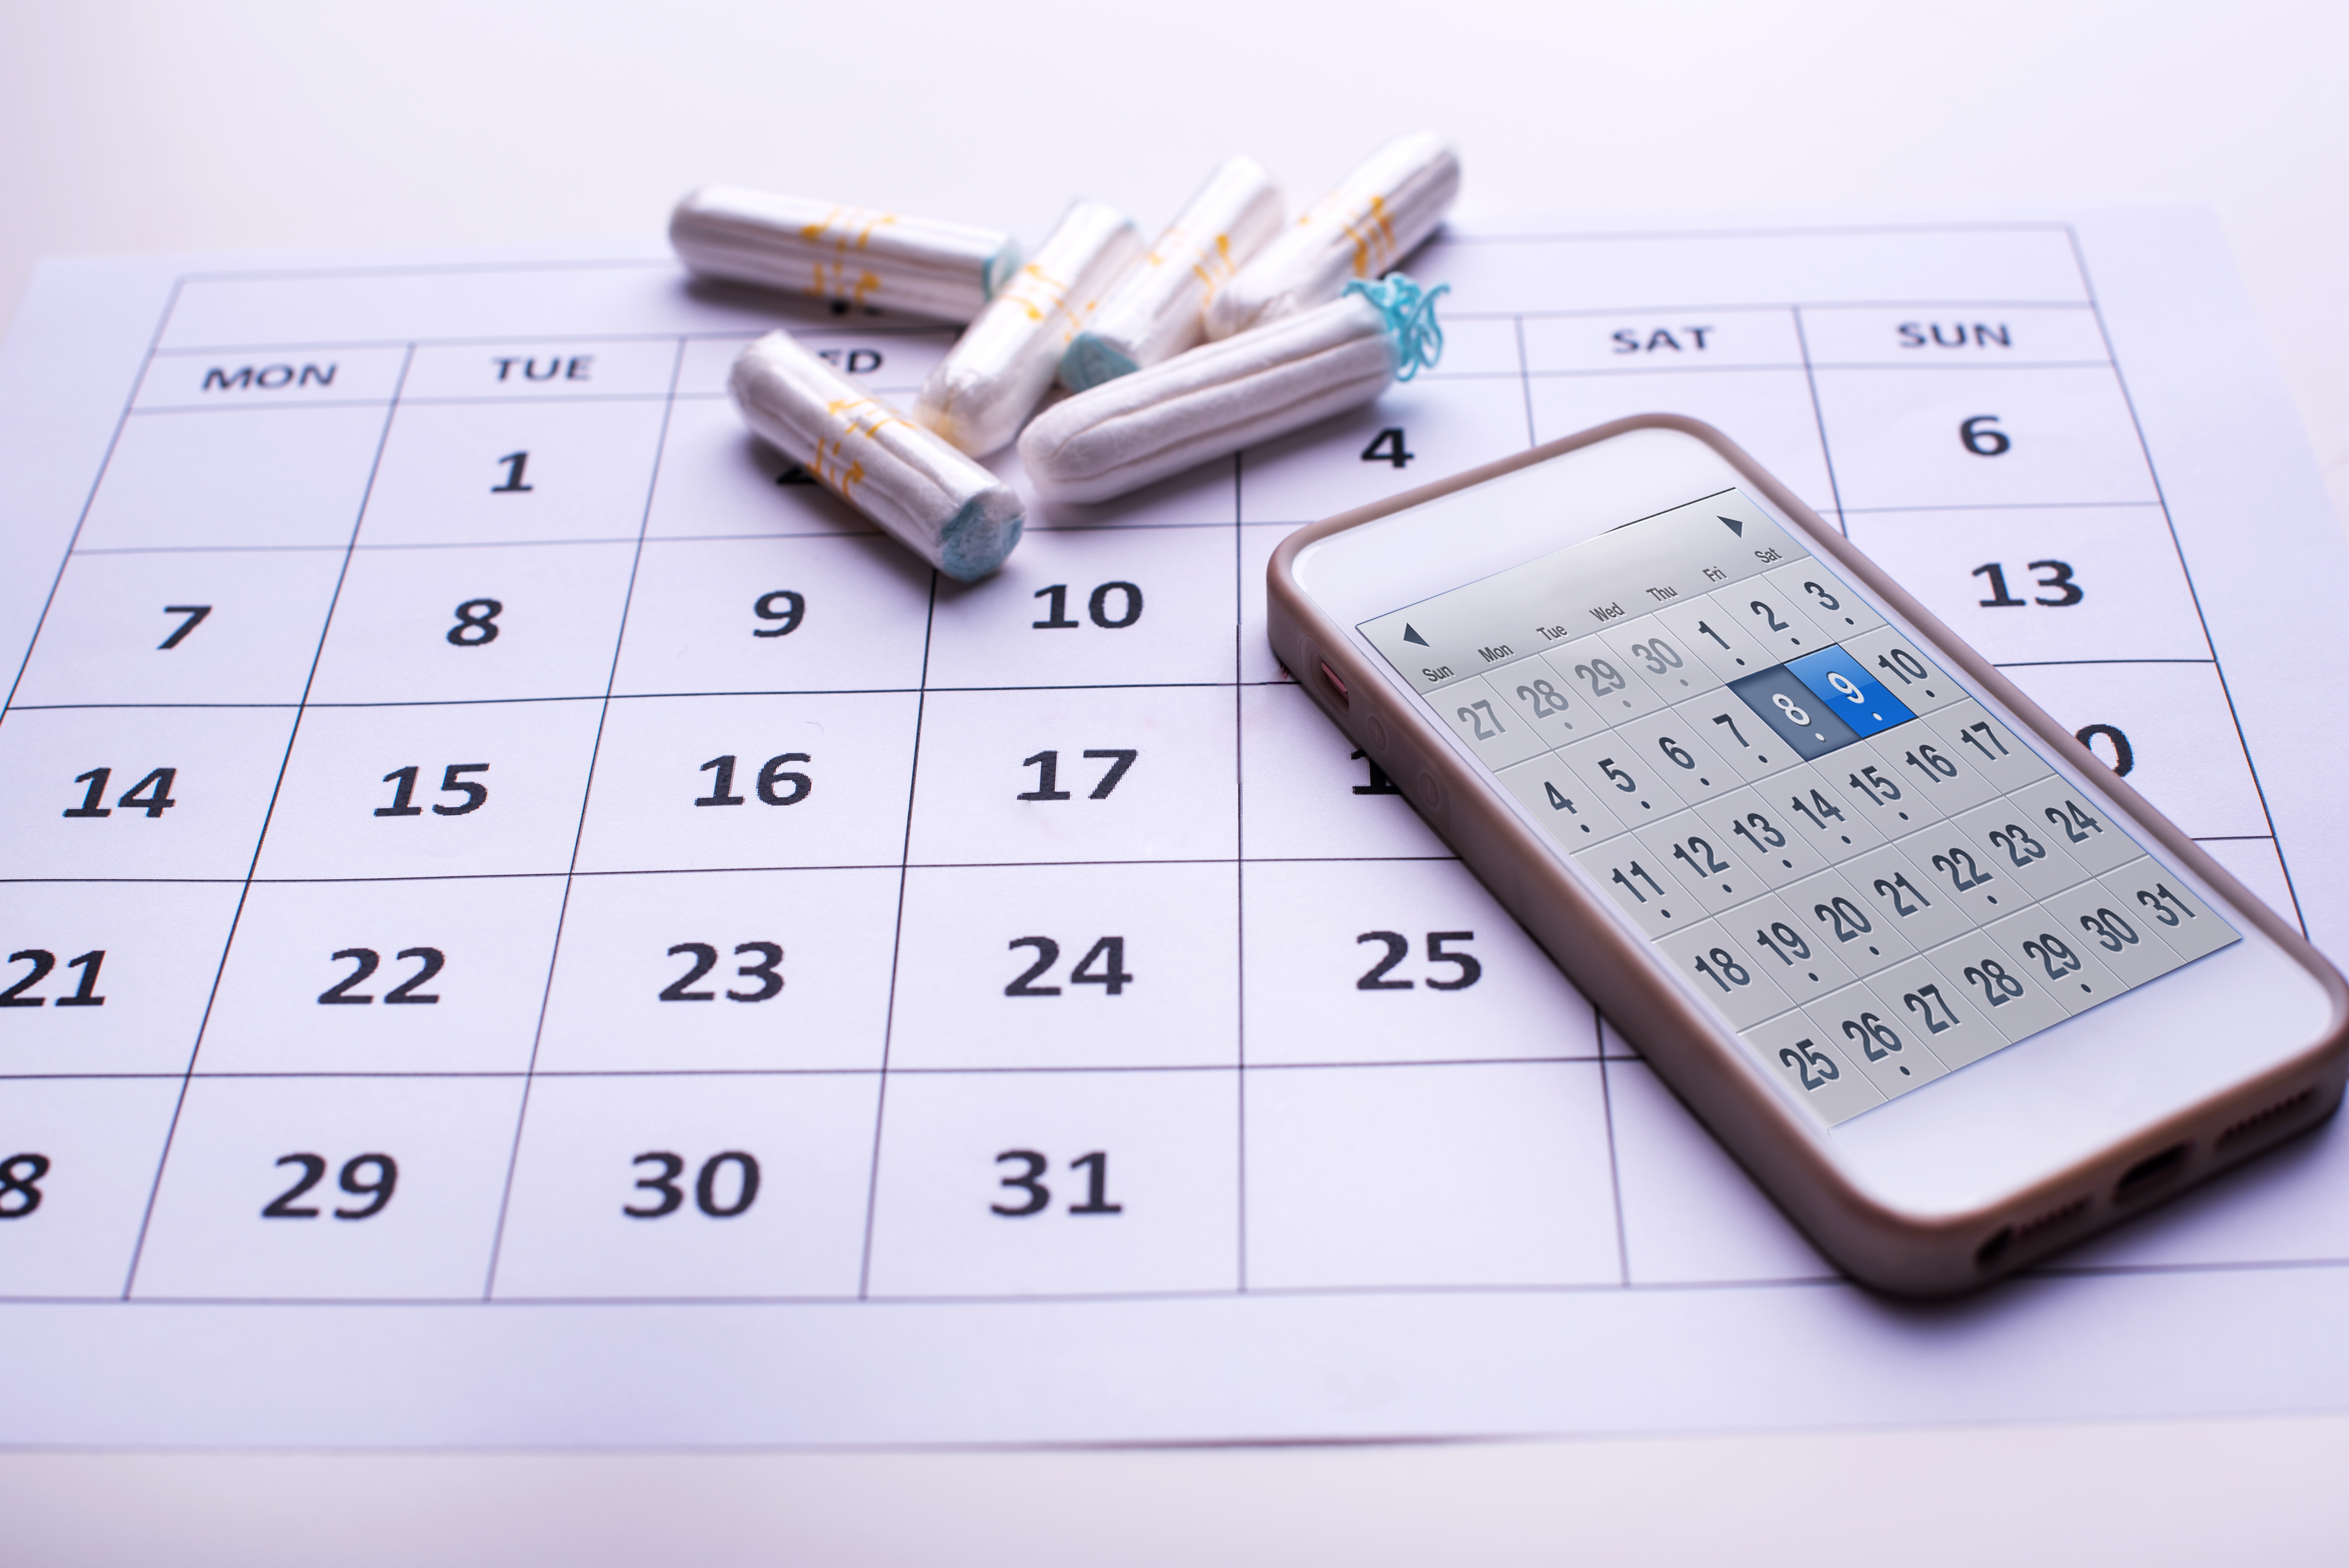 Clean white tampons, mobile phone and Calendar